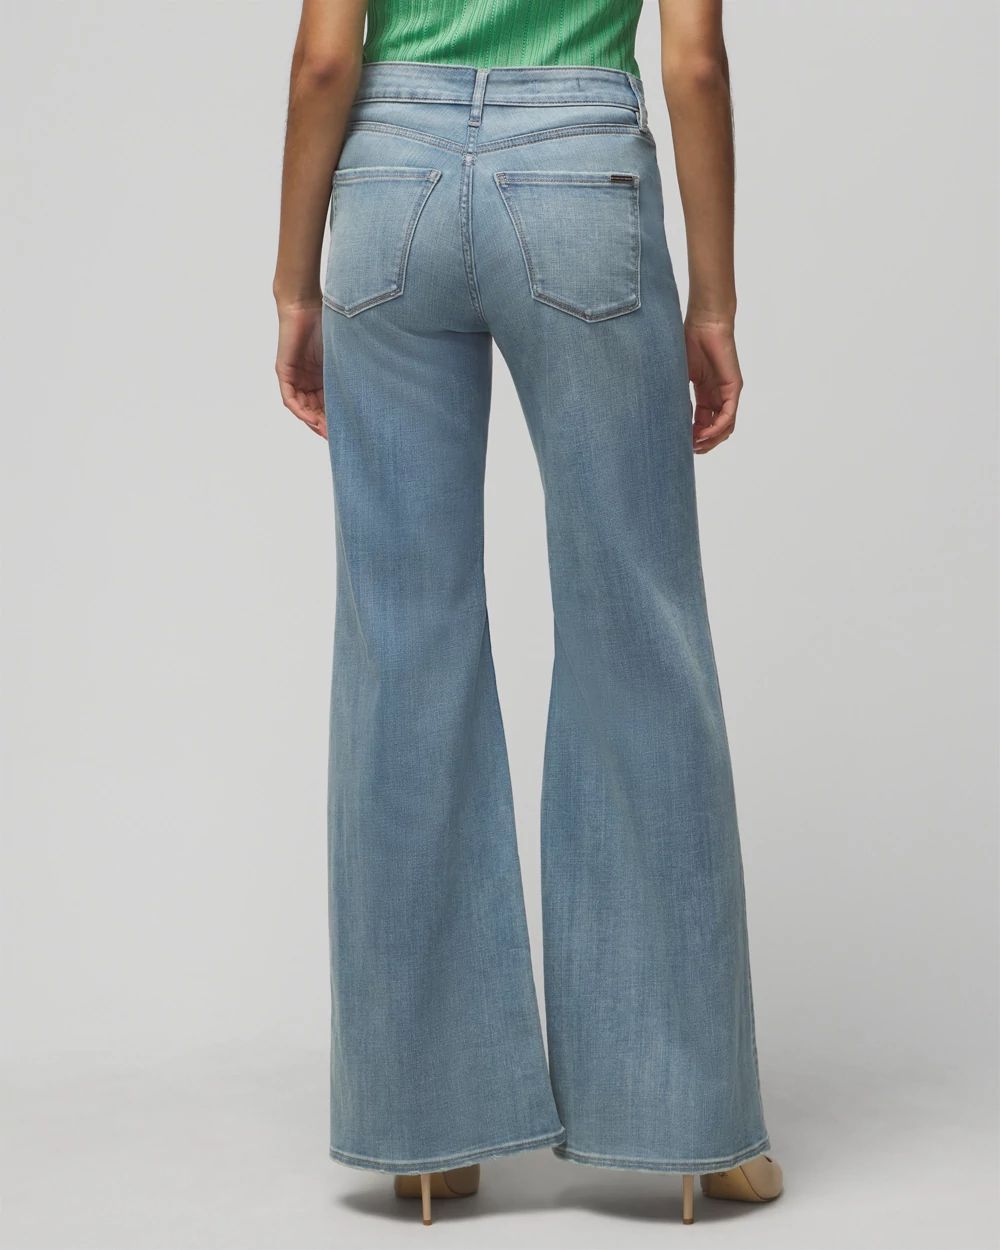 Petite High-Rise Everyday Soft Denim  Wide-Leg Pants click to view larger image.